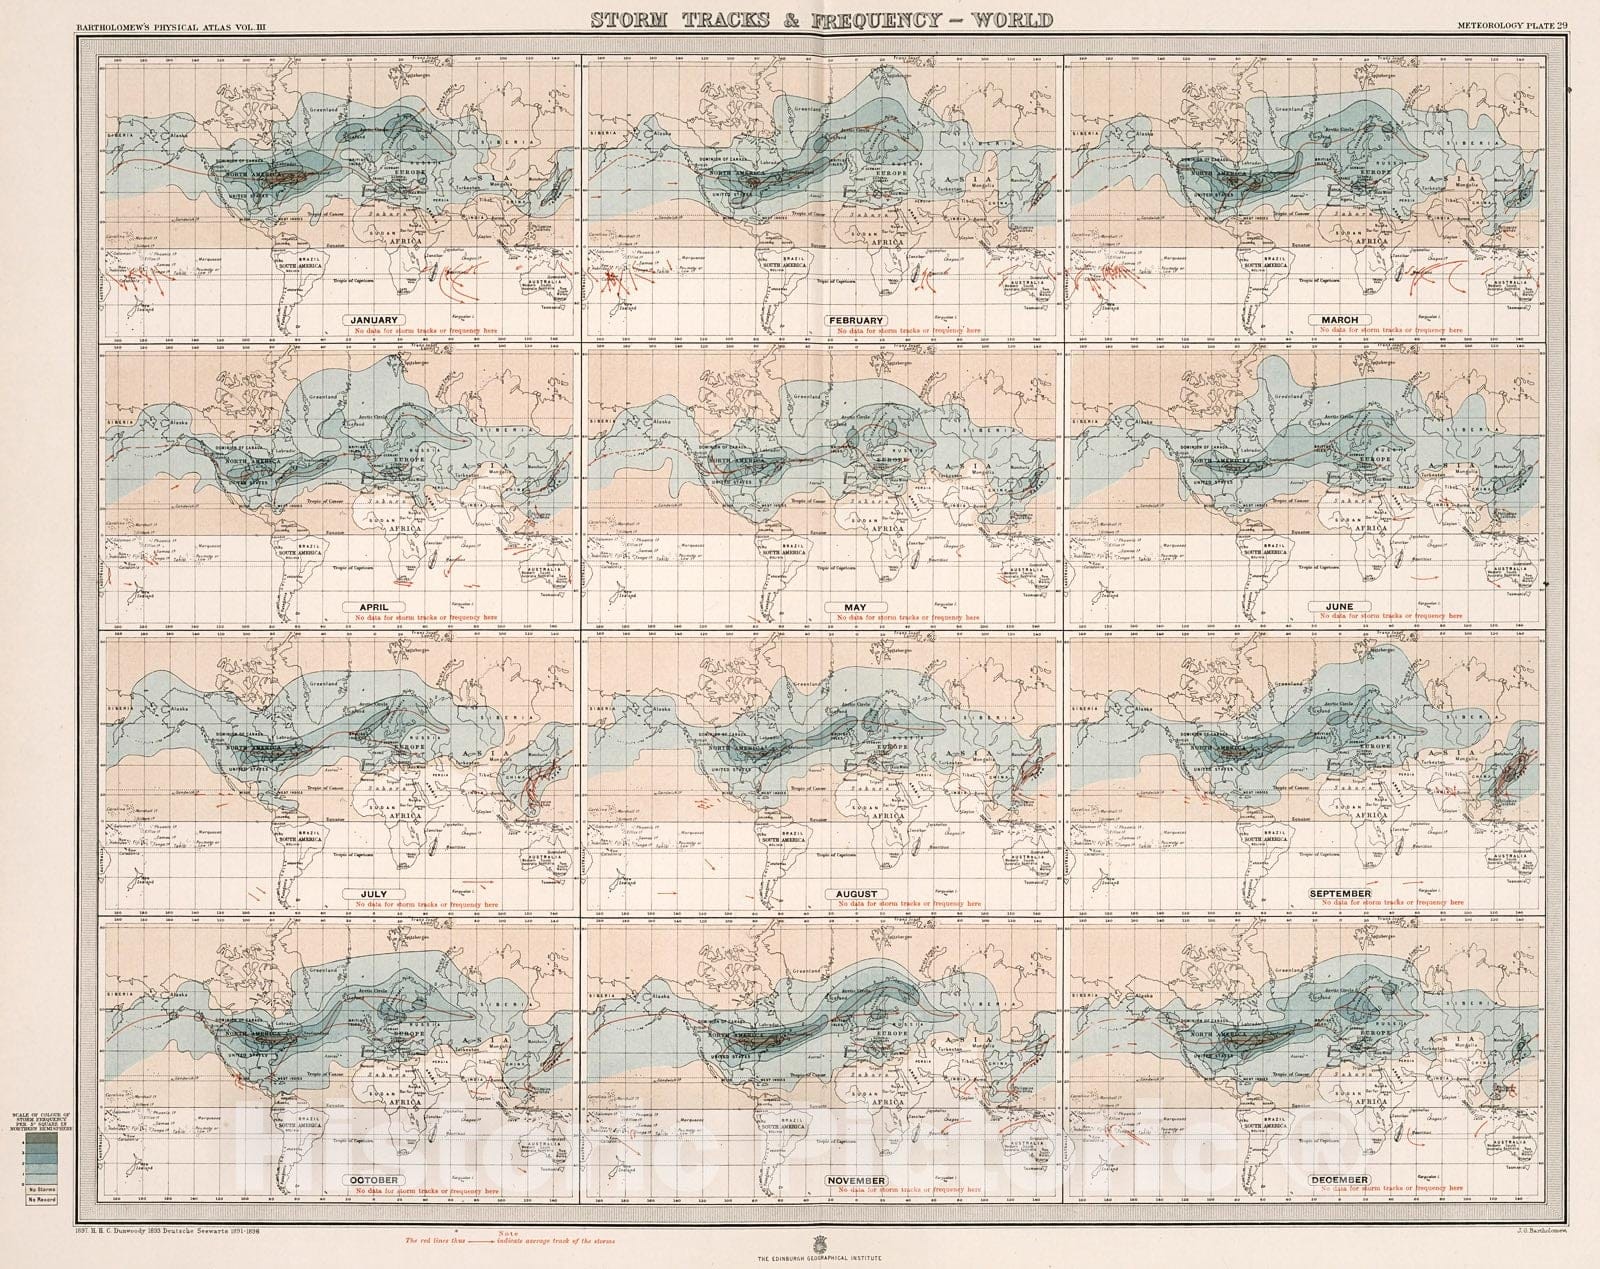 Historic Map : Plate 29. Storm Tracks & Frequency - World., 1899, Vintage Wall Decor